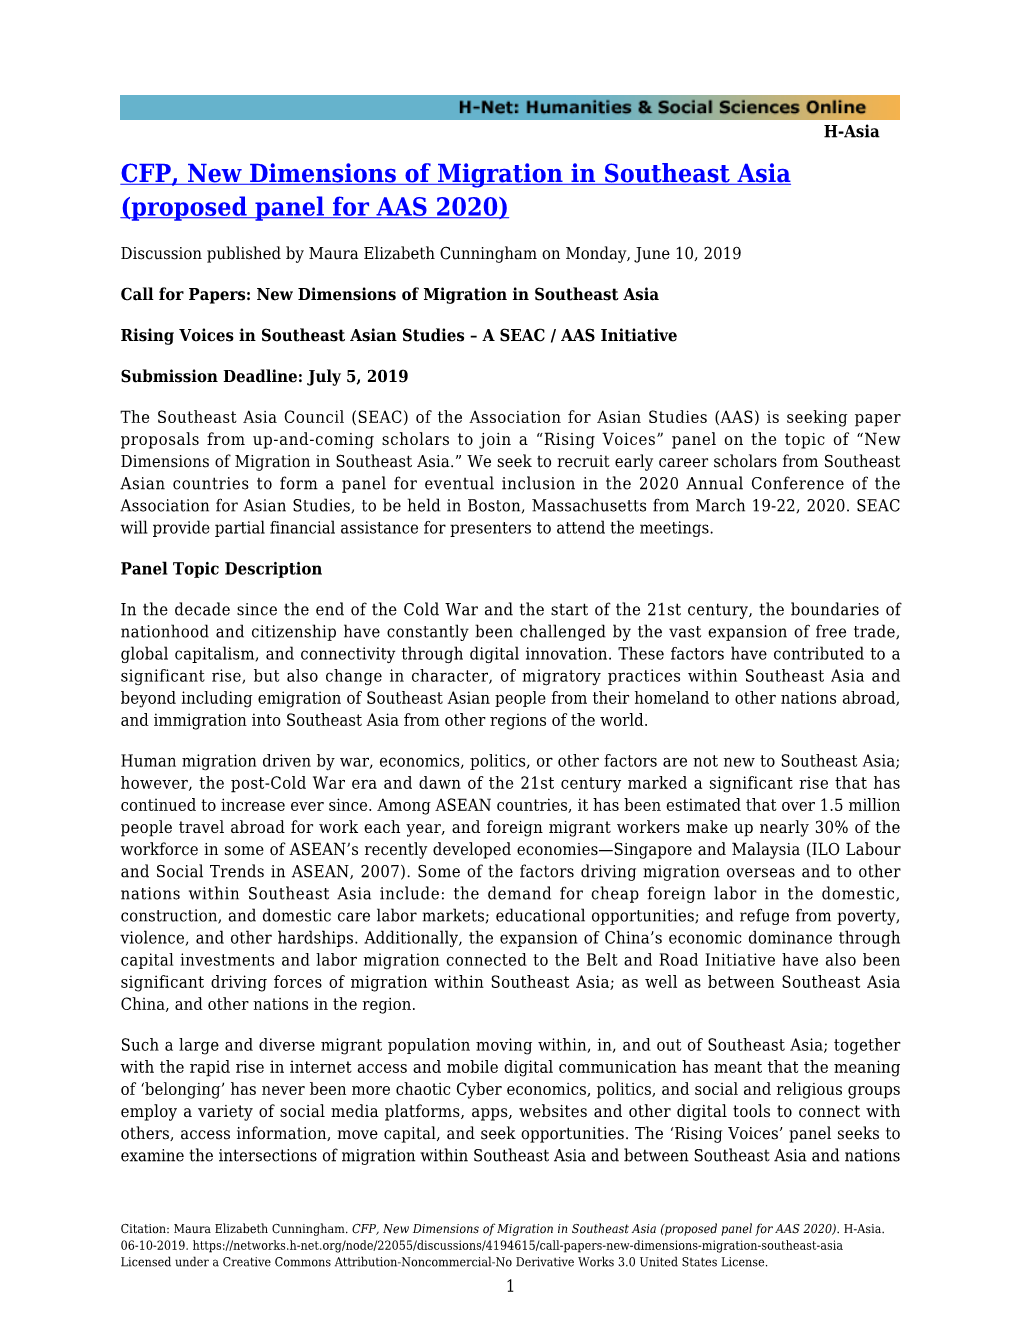 CFP, New Dimensions of Migration in Southeast Asia (Proposed Panel for AAS 2020)